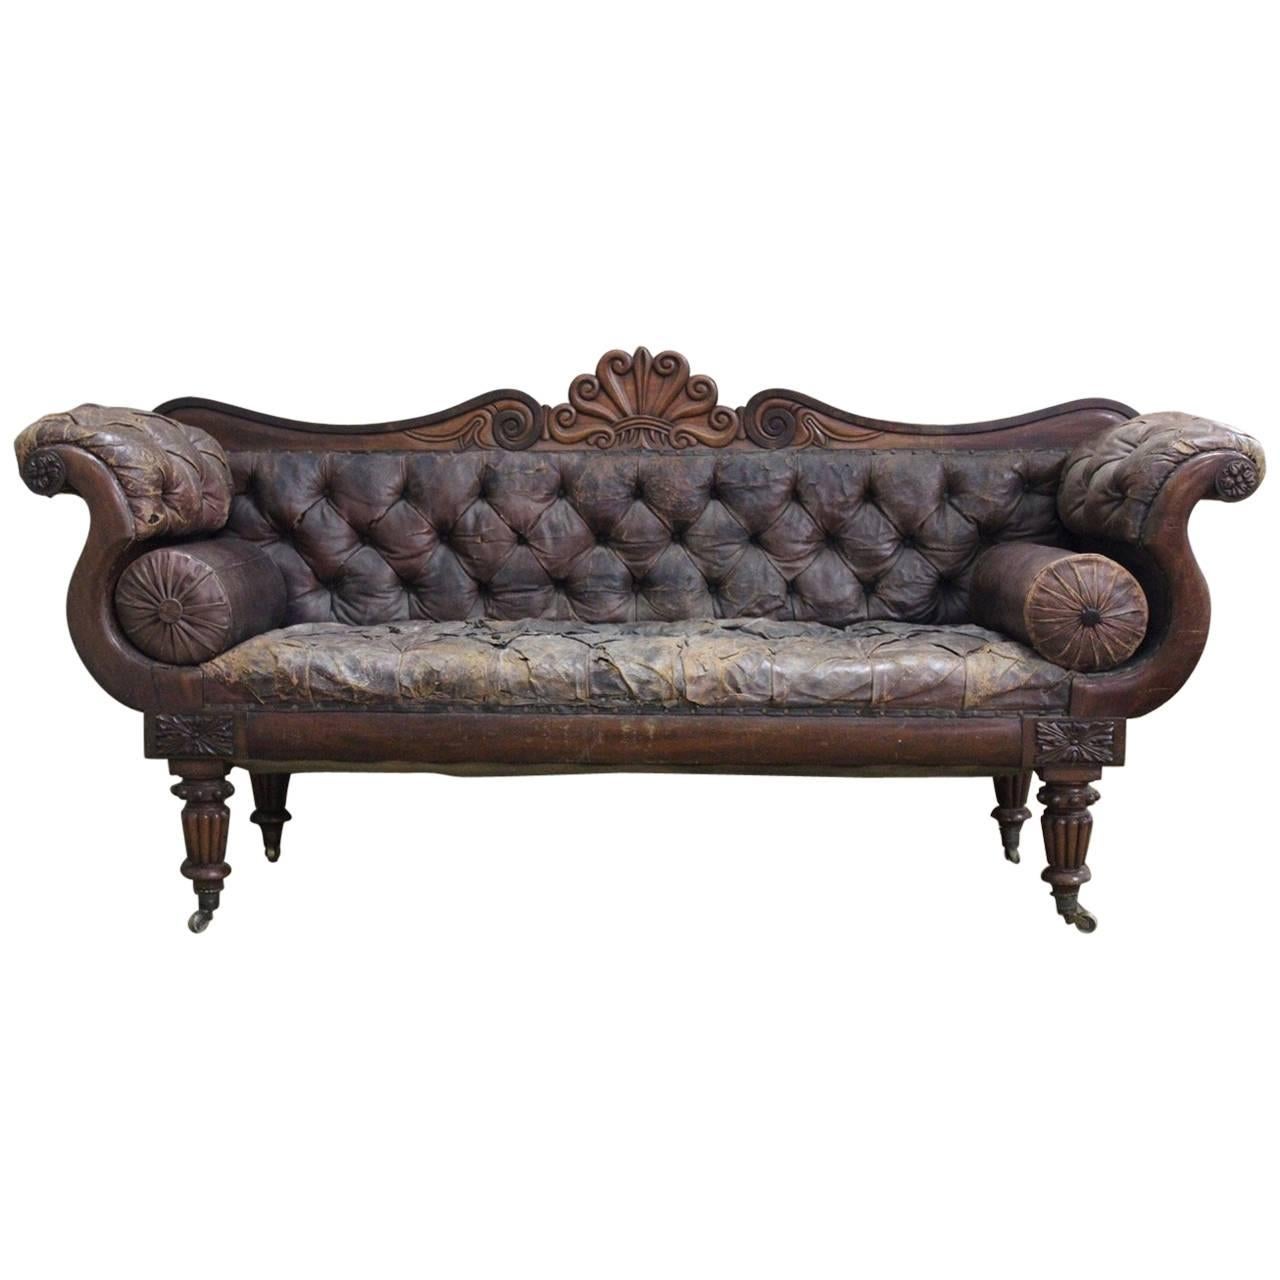 Superb 19th Century English Country House Leather Sofa